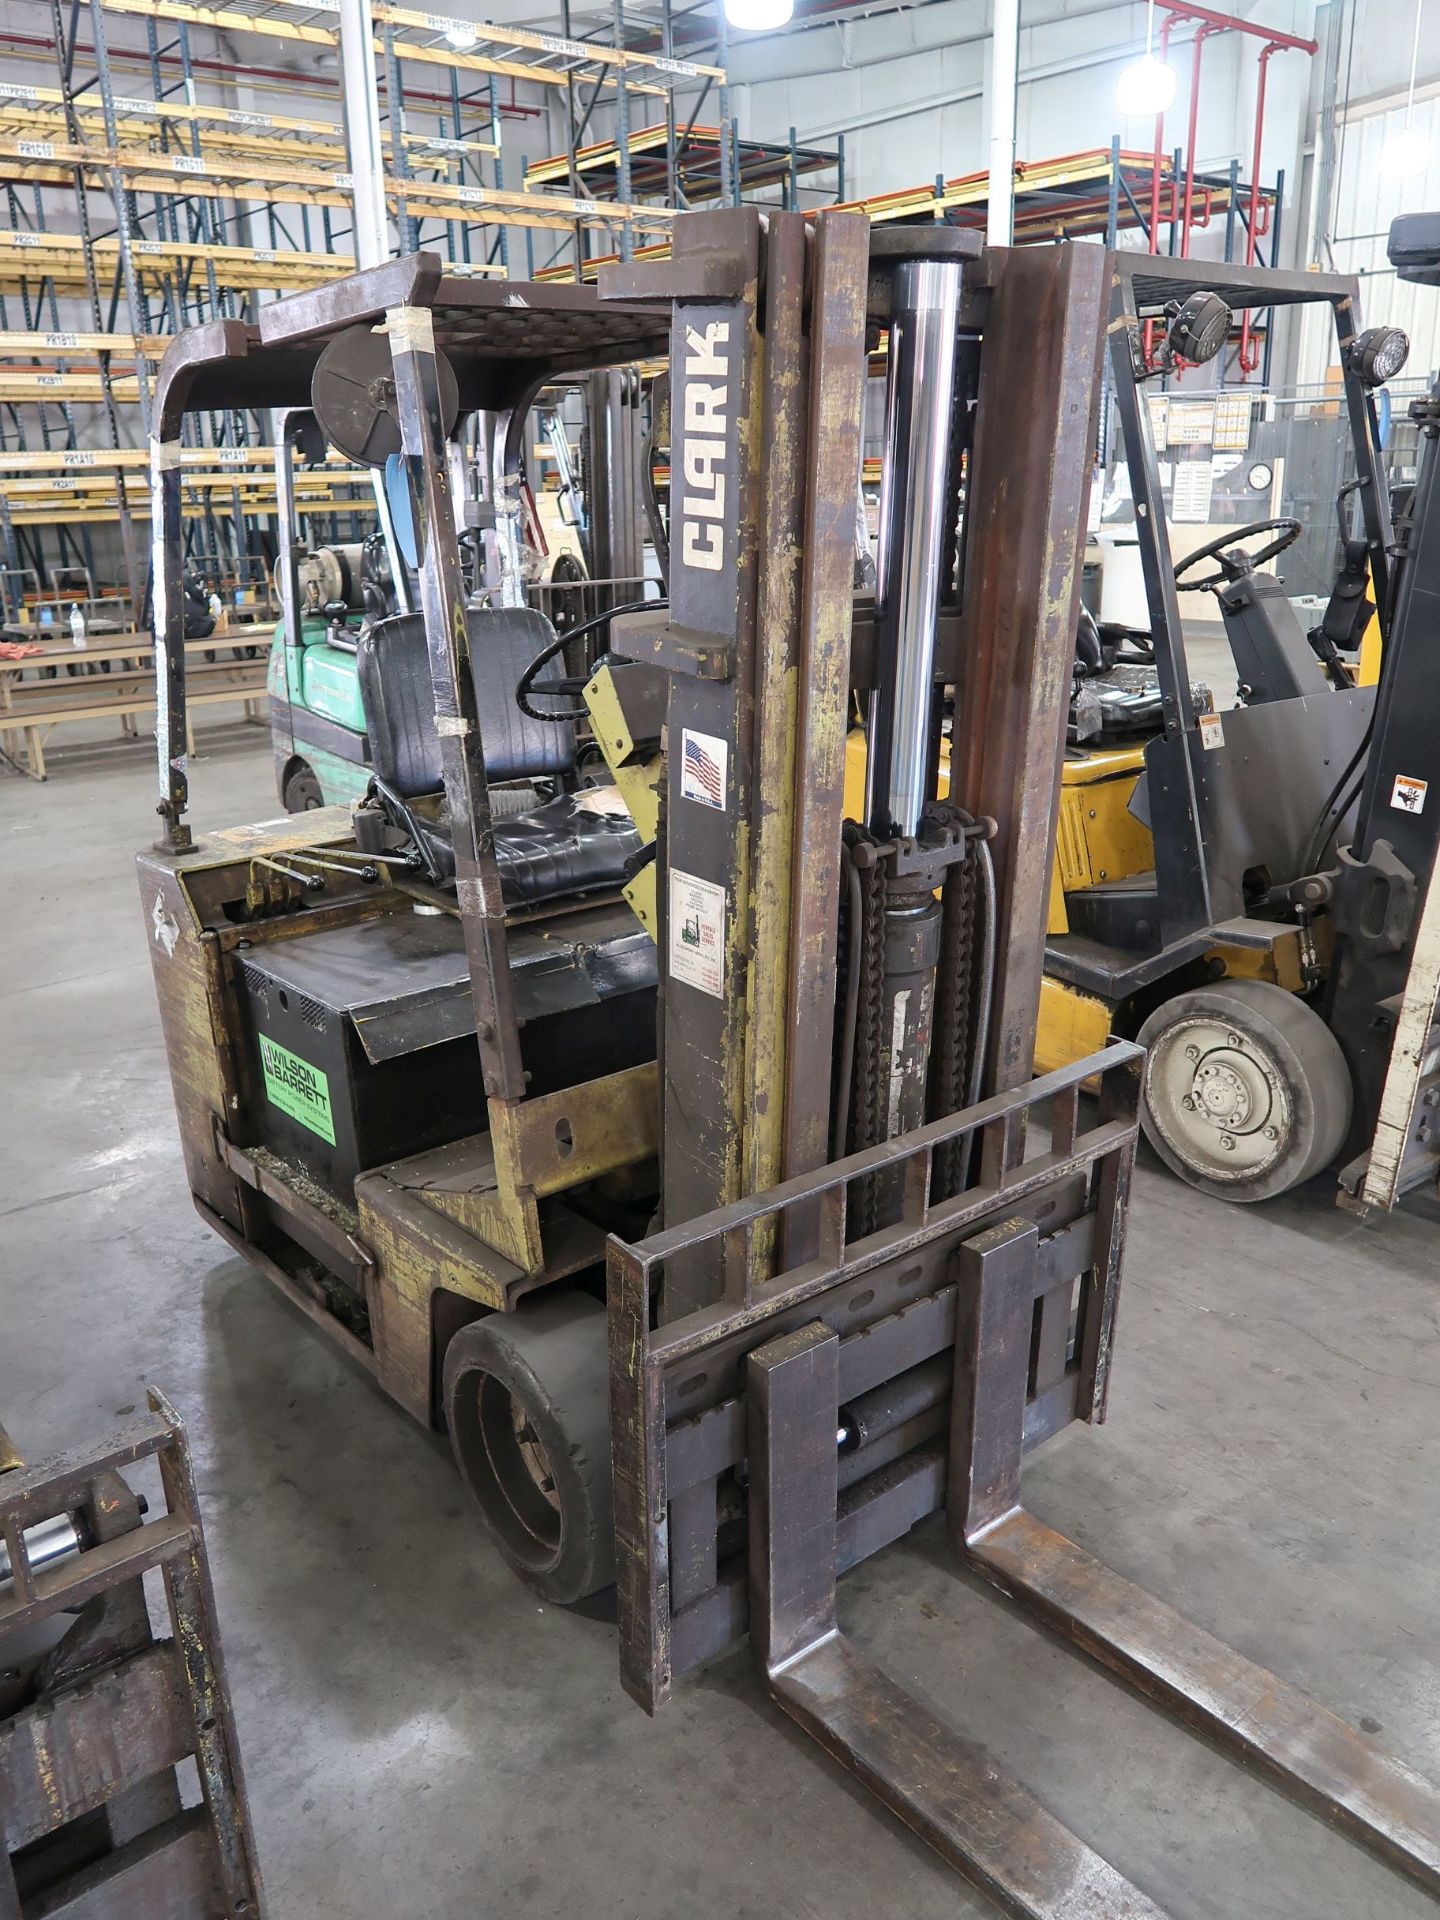 2,600 LB. CLARK MODEL TW40B SIT DOWN ELECTRIC LIFT TRUCK; S/N TW253-329-4745, 3-STAGE MAST, 76" MAST - Image 2 of 8